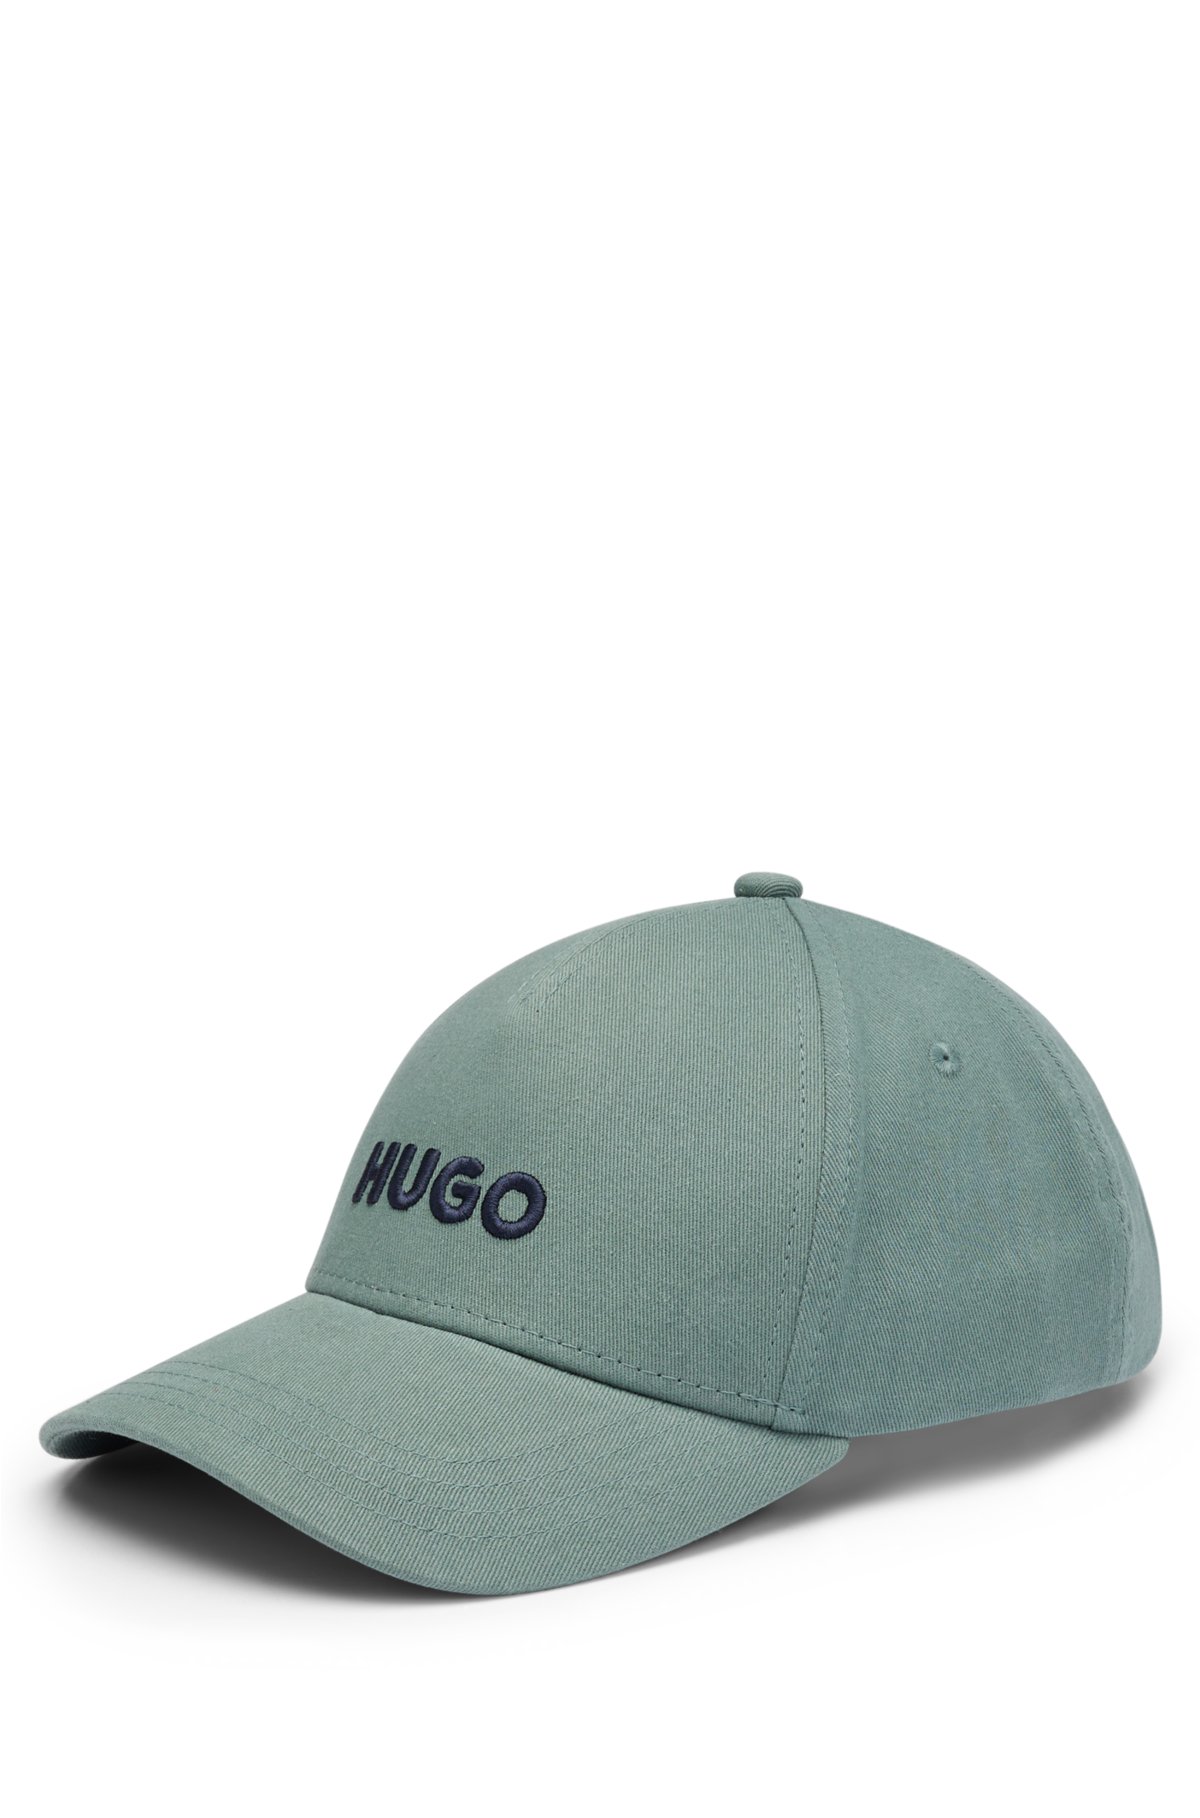 cap HUGO Cotton-twill closure embroidered logo and snap with -